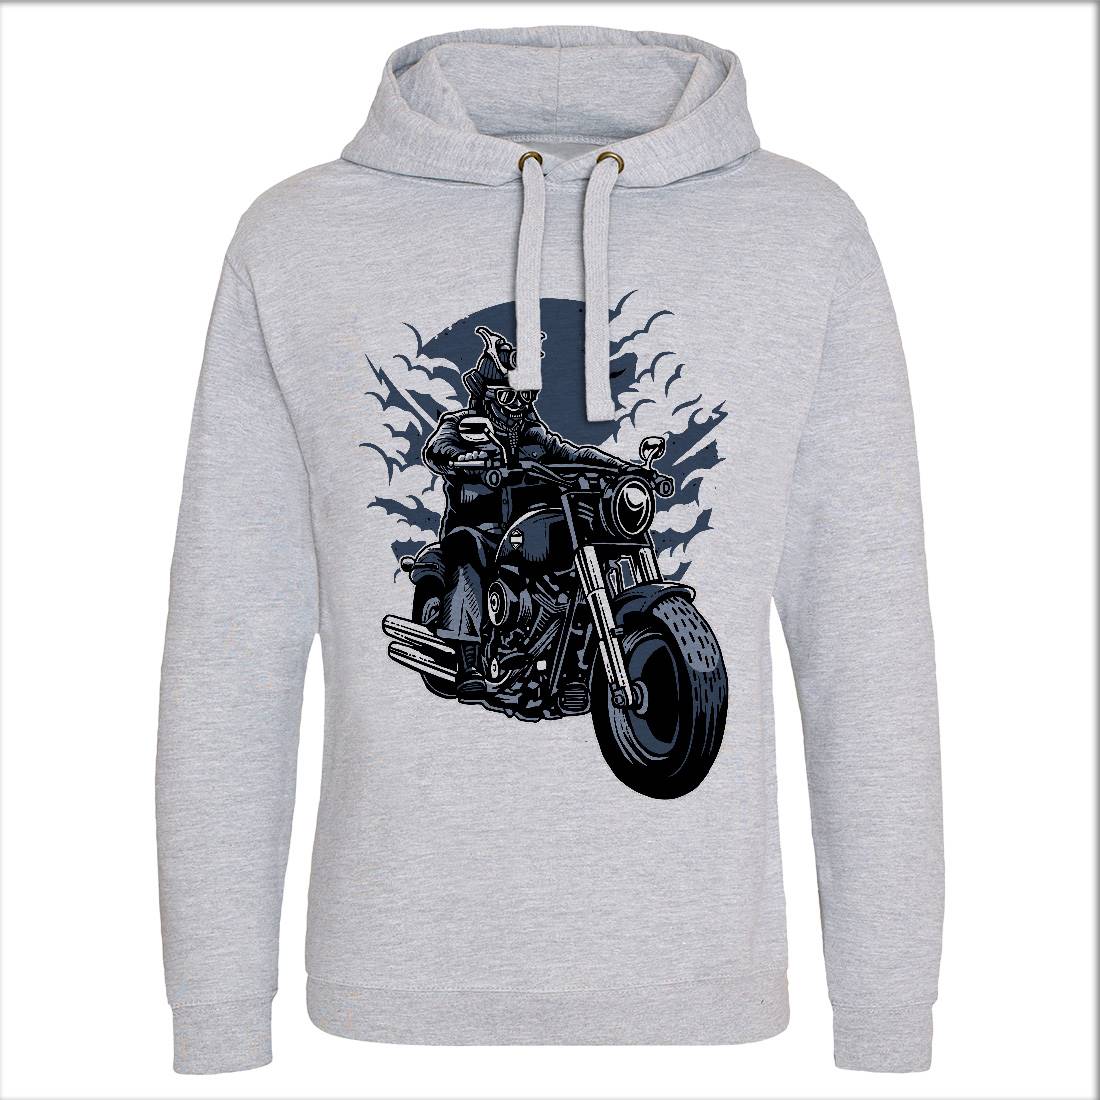 Samurai Ride Mens Hoodie Without Pocket Warriors A568